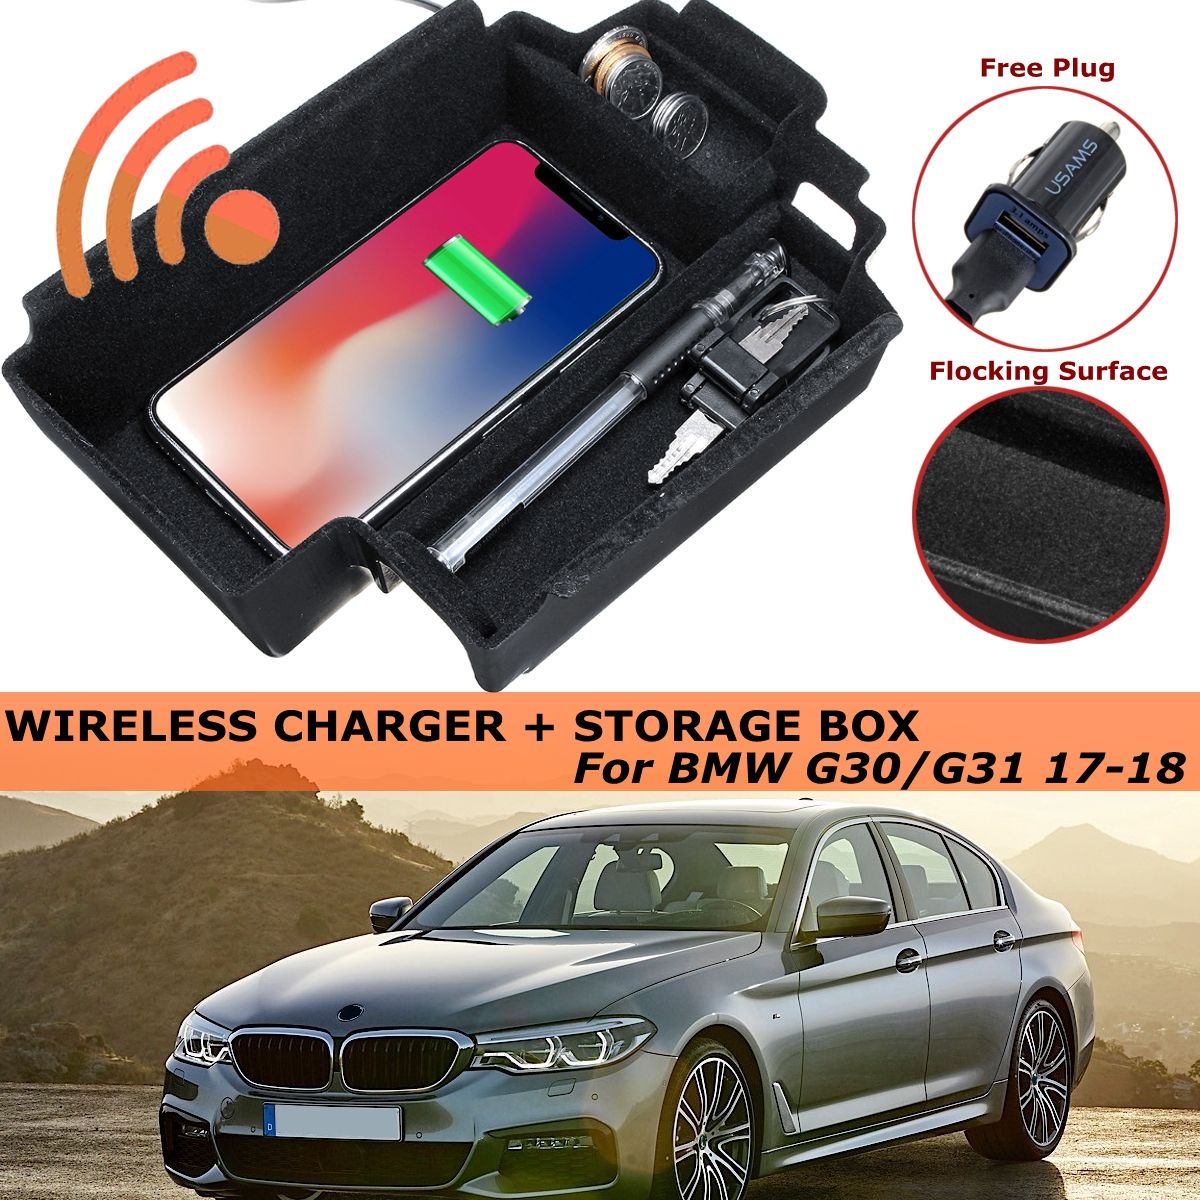 Phone-Wireless-Car-Charger-Central-Armrest-Storage-Box-For-G30-G31-5-Series-17-18-1424944